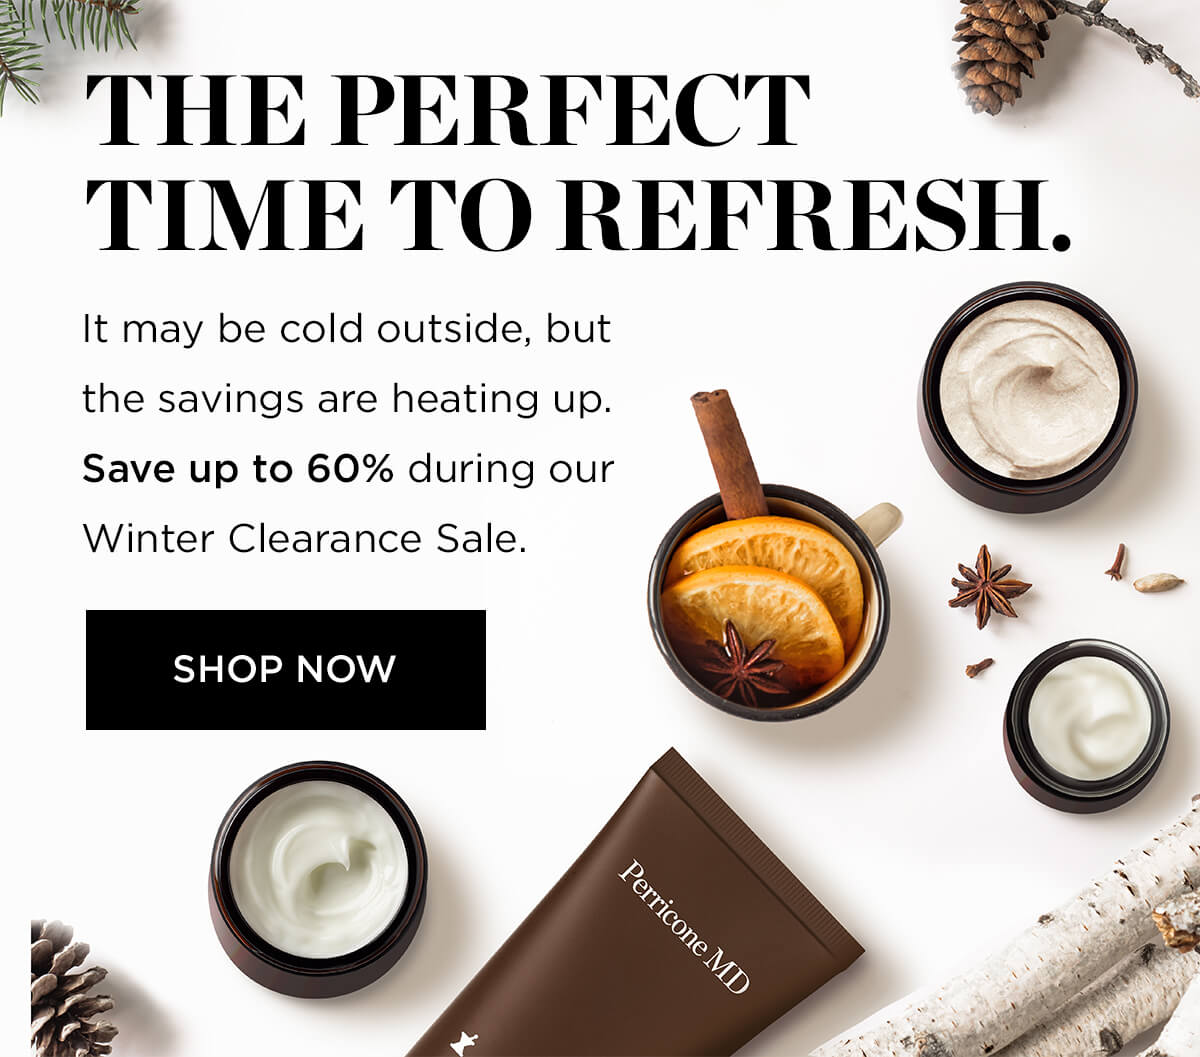 %K N He THE PERFECT TIME TO REFRESH. It may be cold outside, but the savings are heating up. Save up to 60% during our Winter Clearance Sale. SHOP NOW vy 